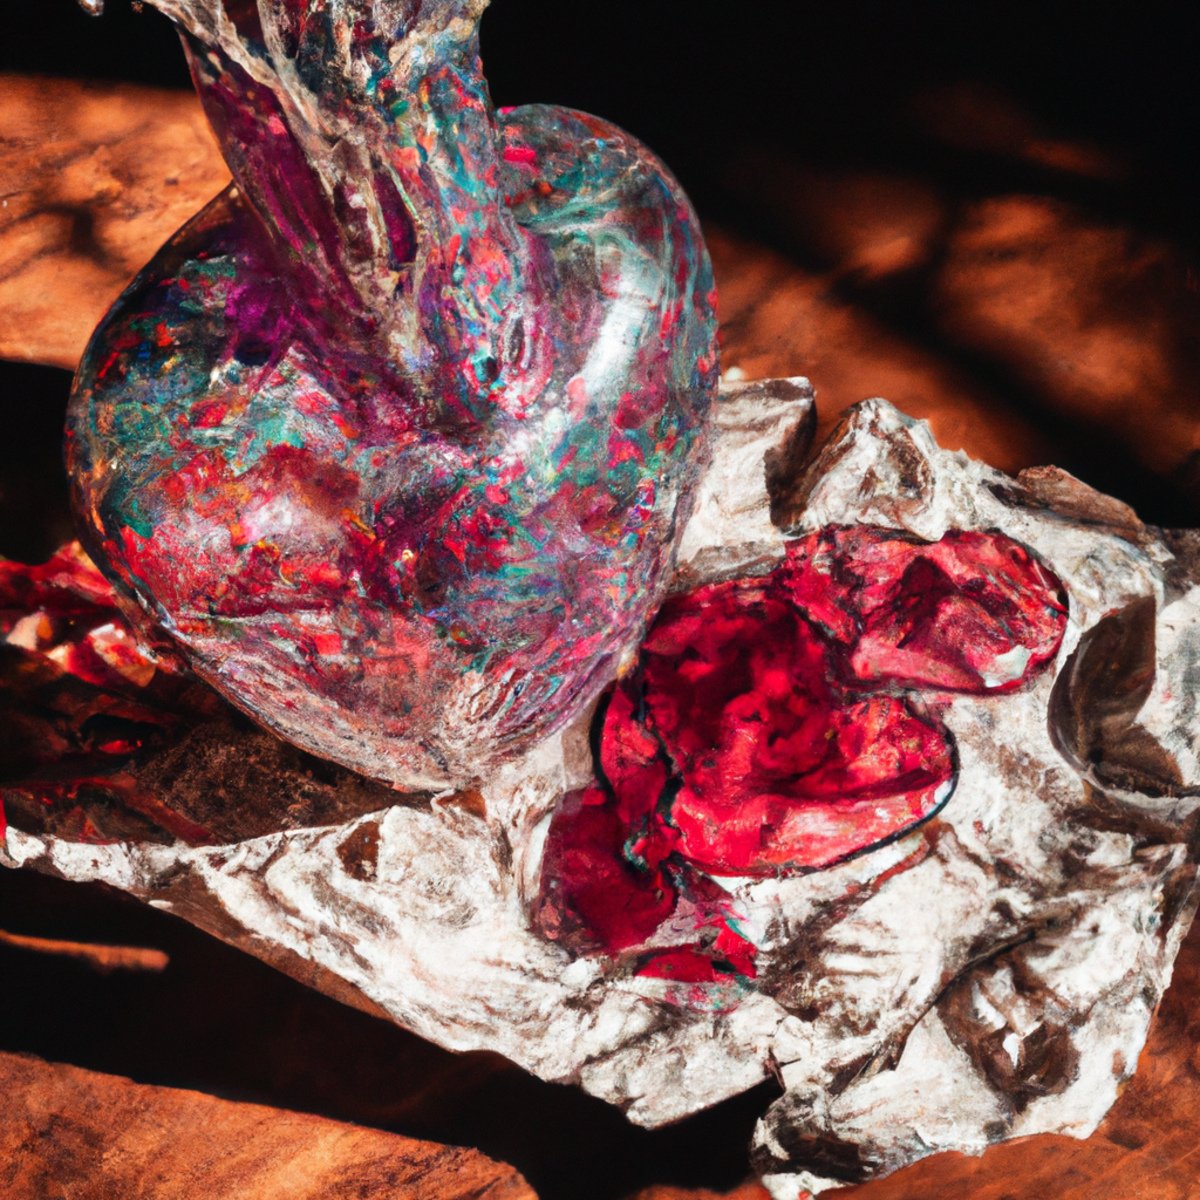 Heart-shaped glass vase with intricate patterns and vibrant colors, crumpled paper symbolizing distress, surrounded by dried flowers on a wooden table, bathed in soft sunlight - Takotsubo Cardiomyopathy (Broken Heart Syndrome)